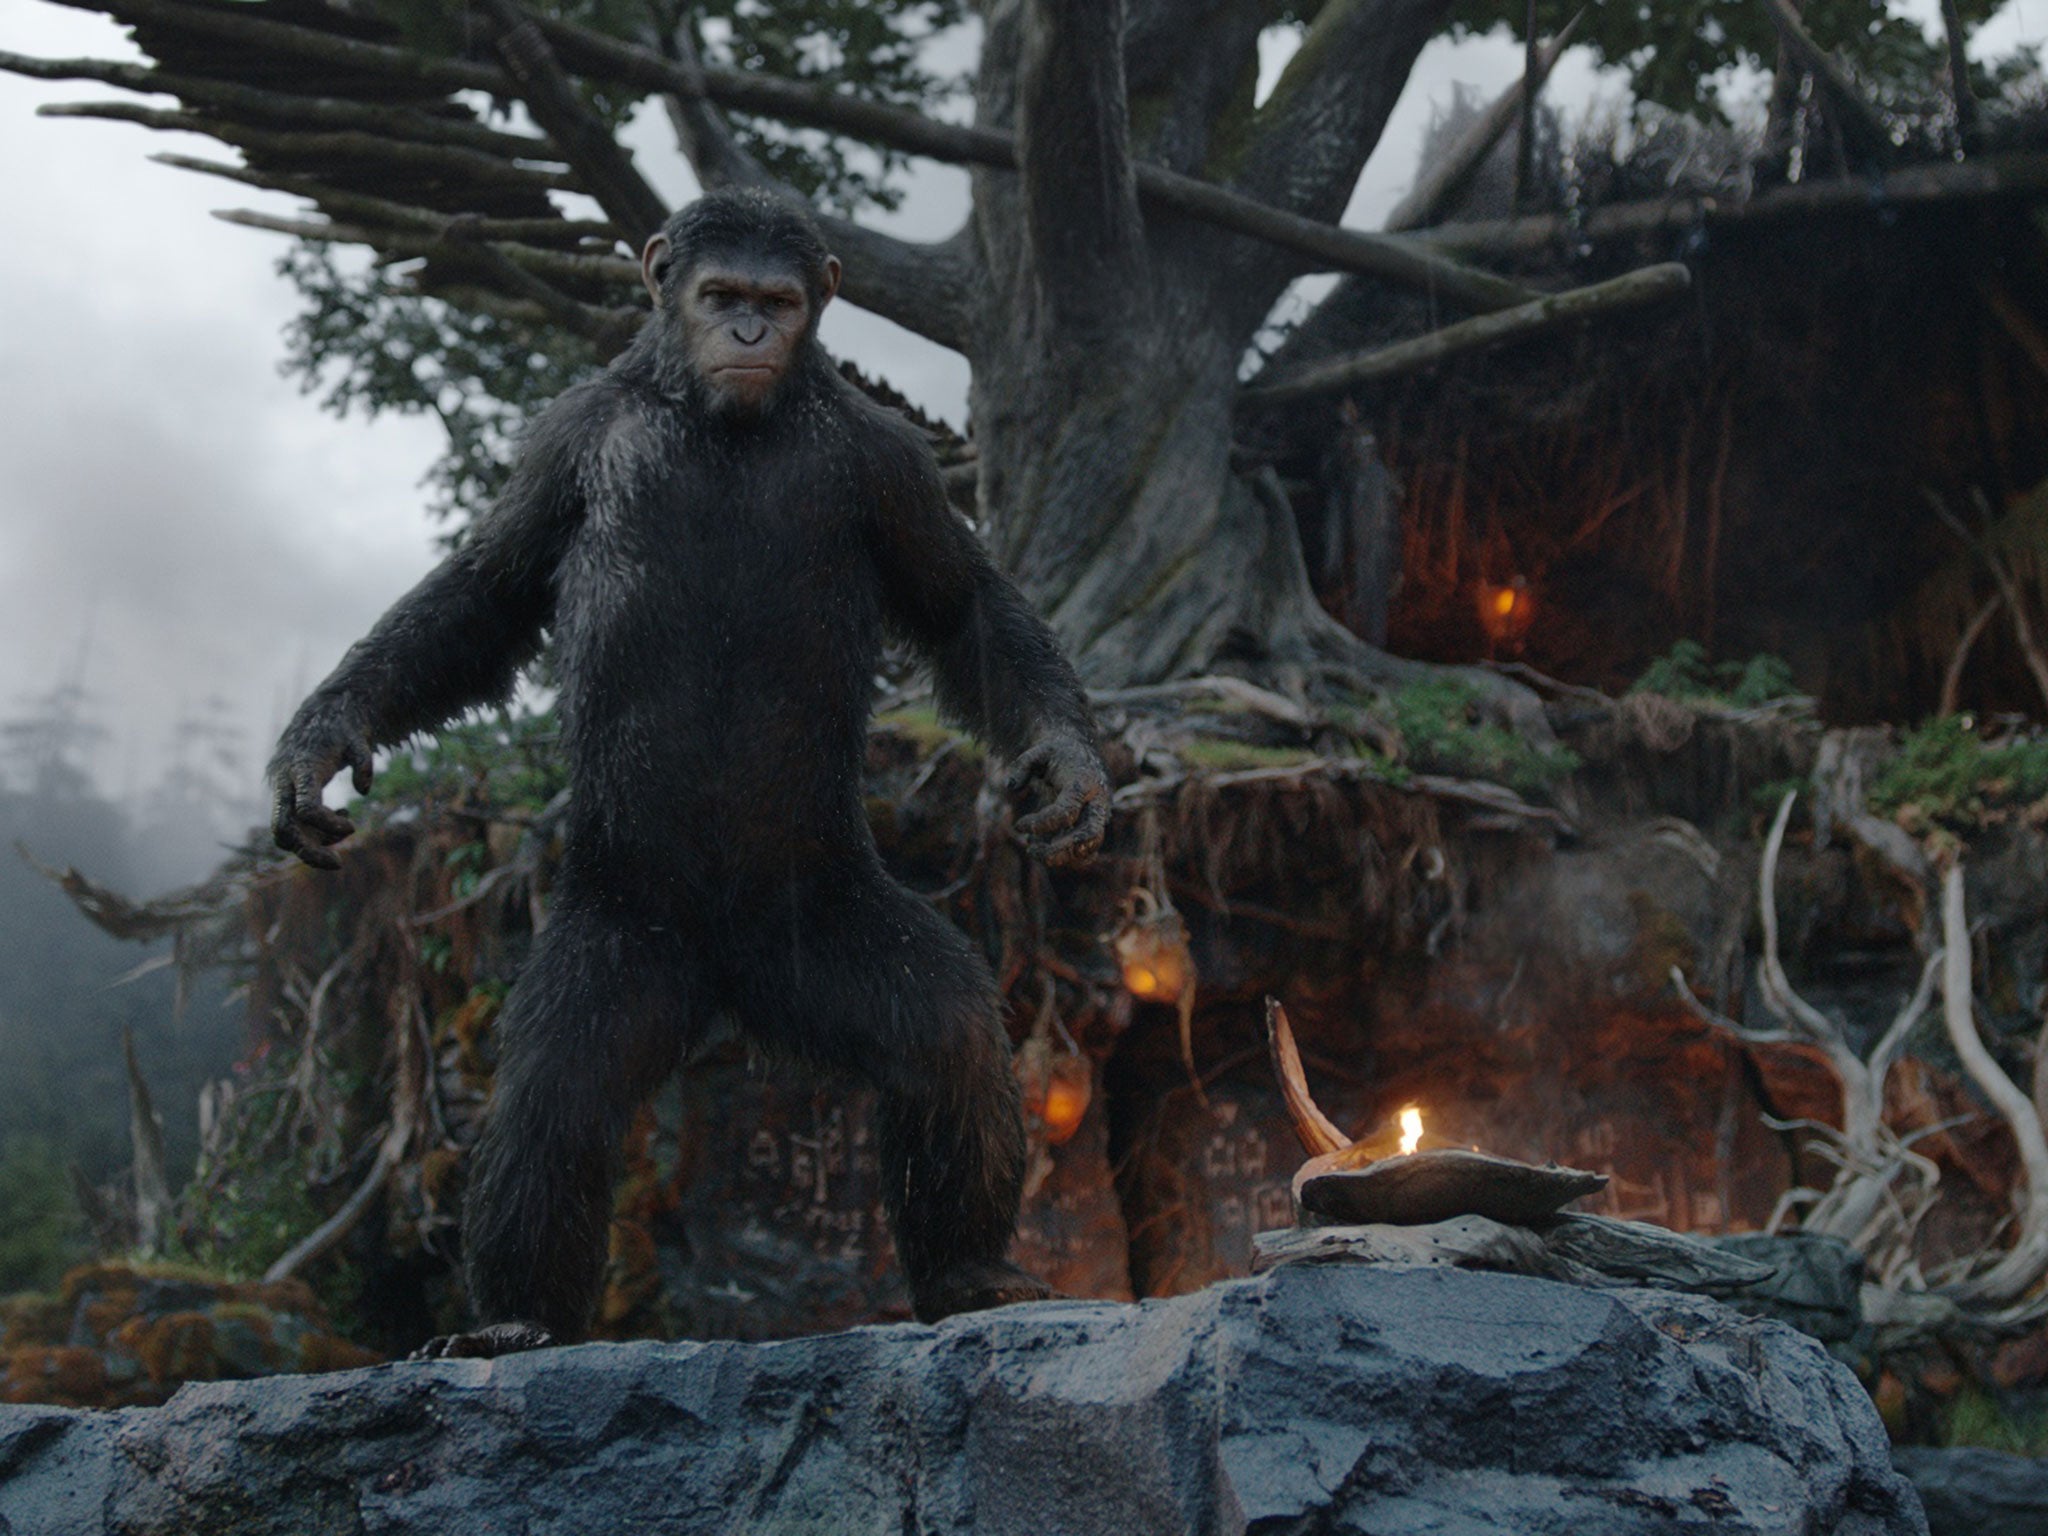 Dawn of the Planet of the Apes hits UK cinemas on 17 July